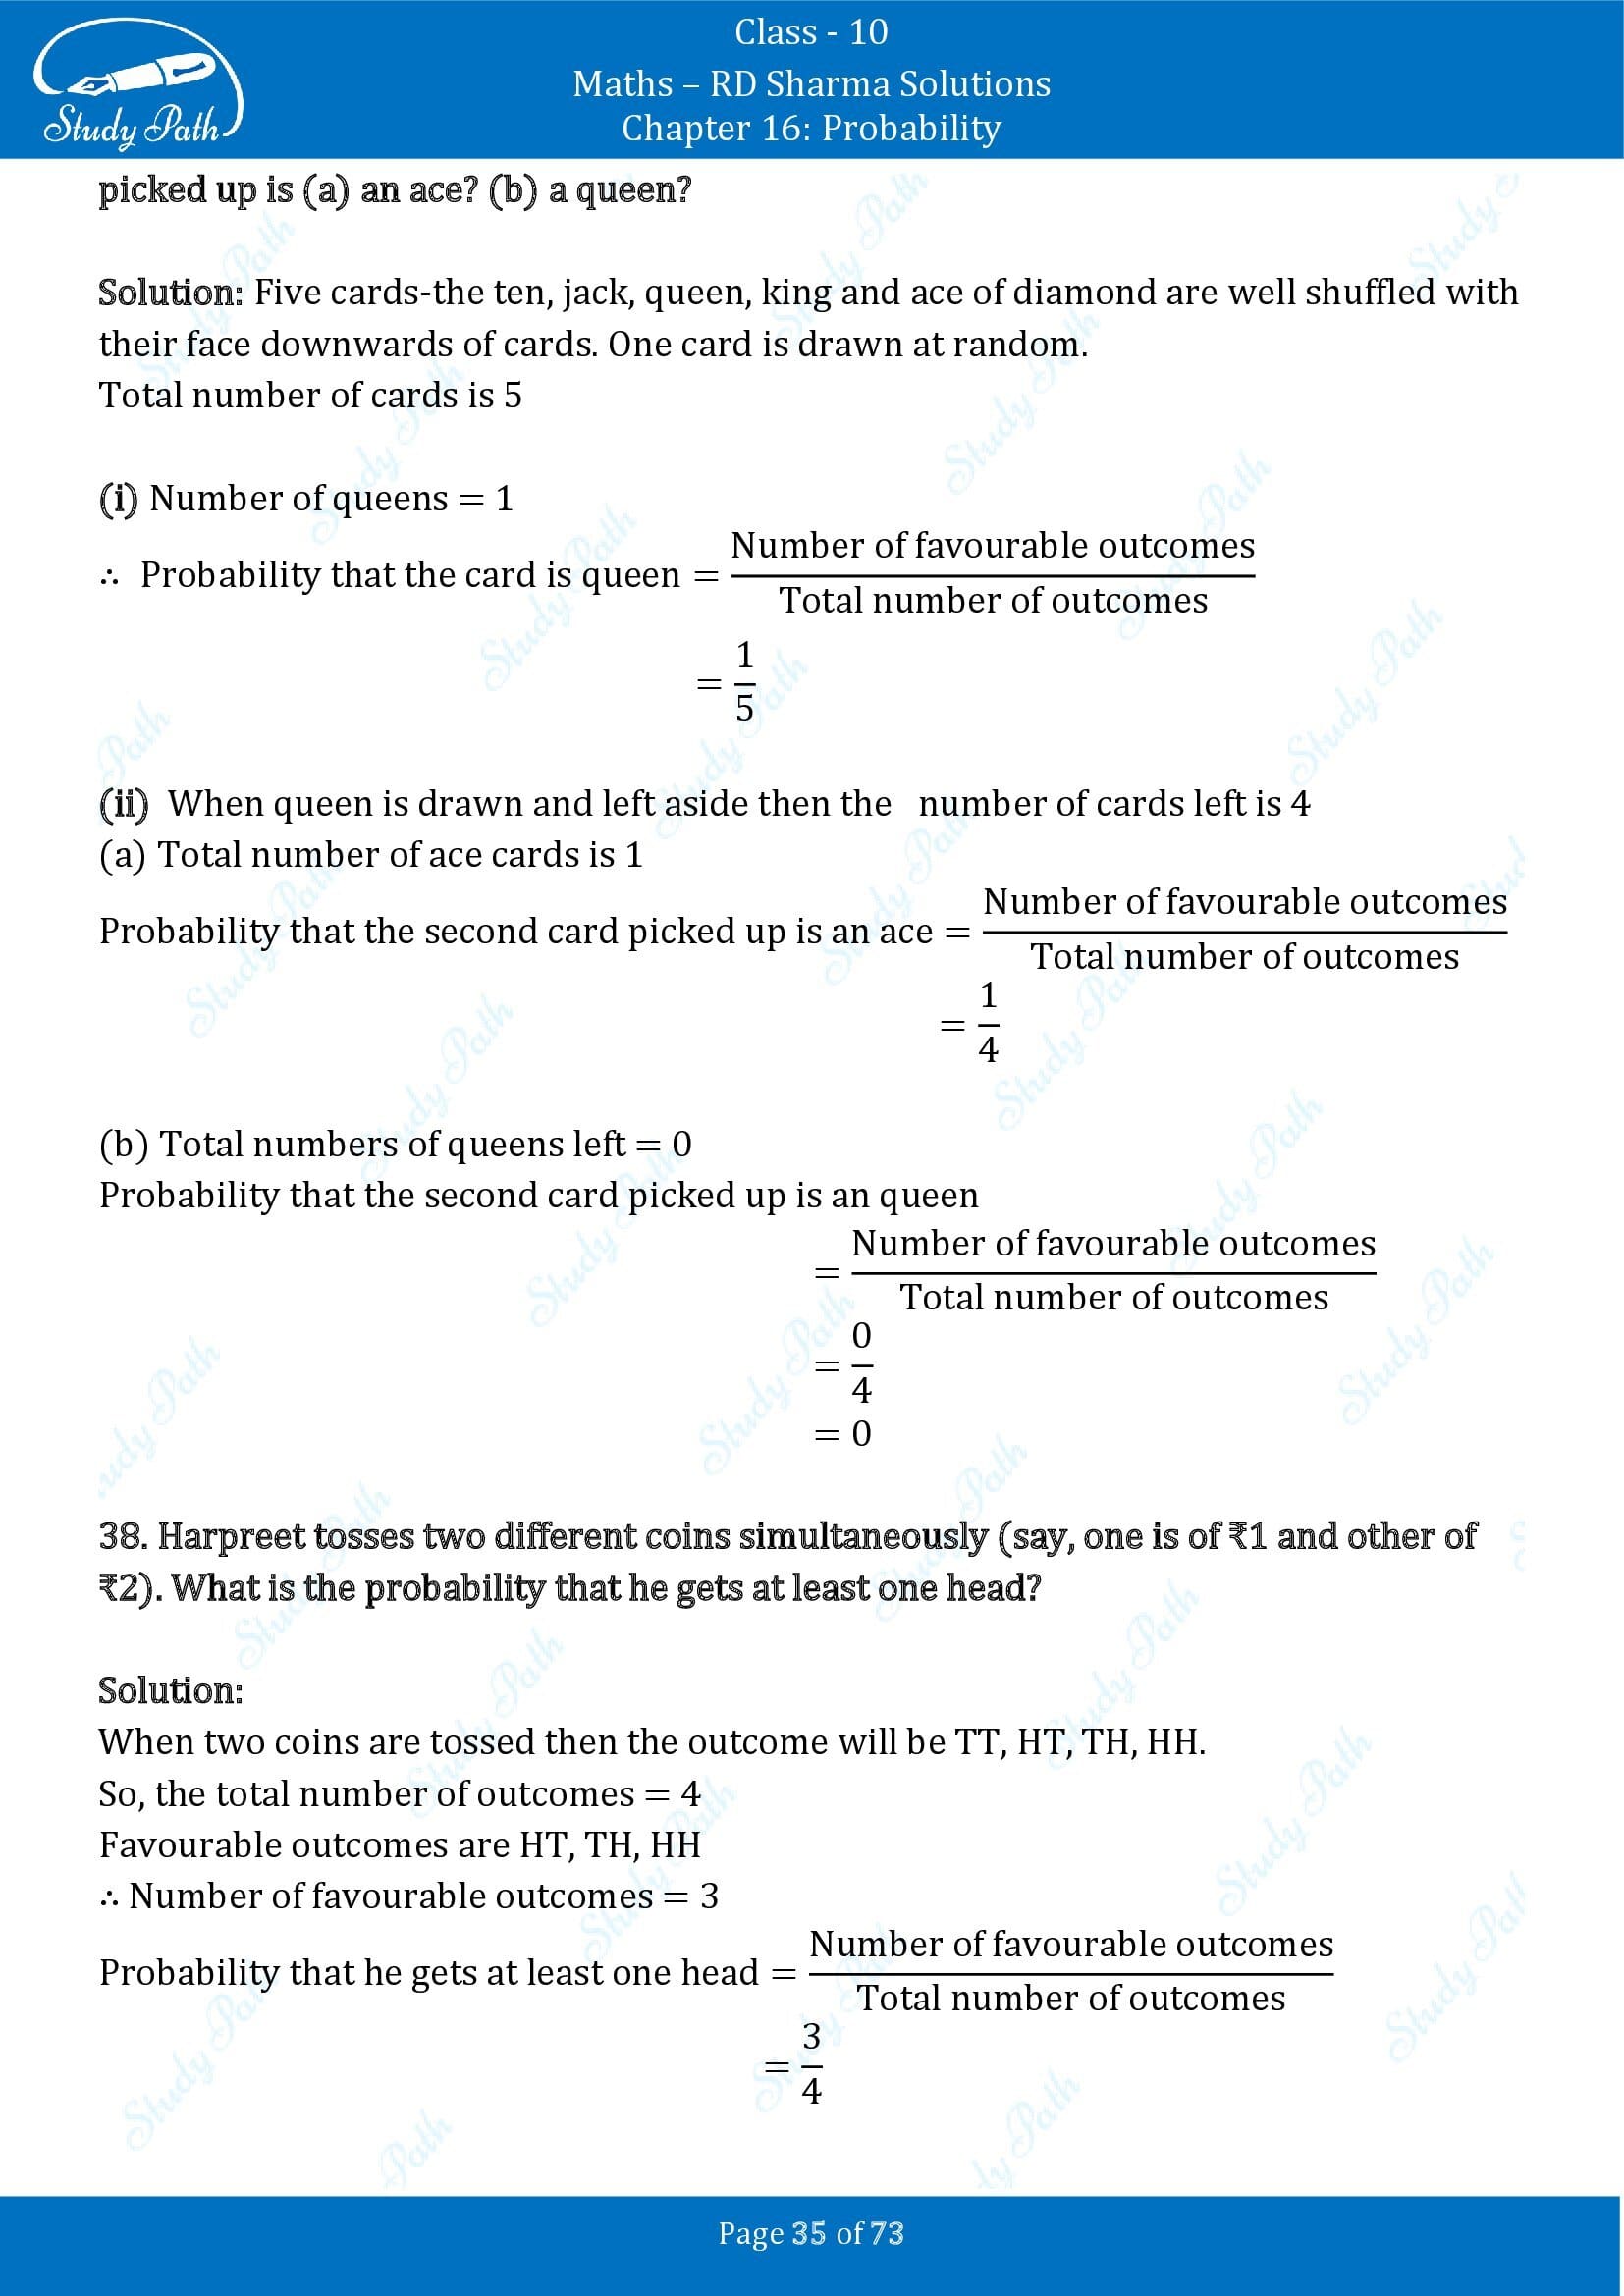 RD Sharma Solutions Class 10 Chapter 16 Probability Exercise 16.1 00035